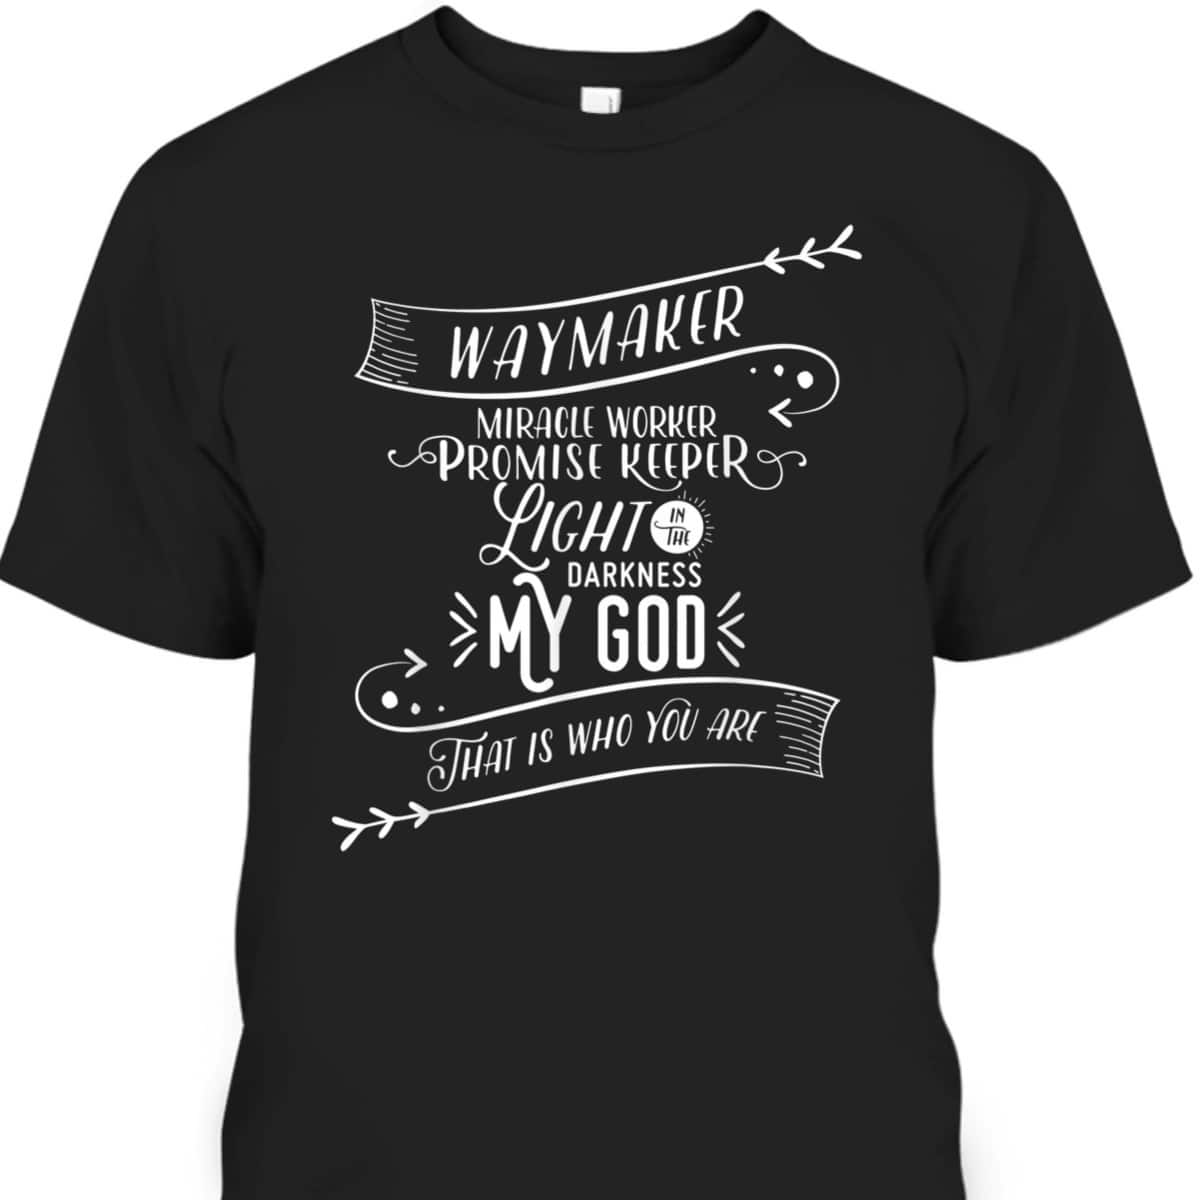 Waymaker T-Shirt Miracle Worker Promise Keeper Light In The Darkness